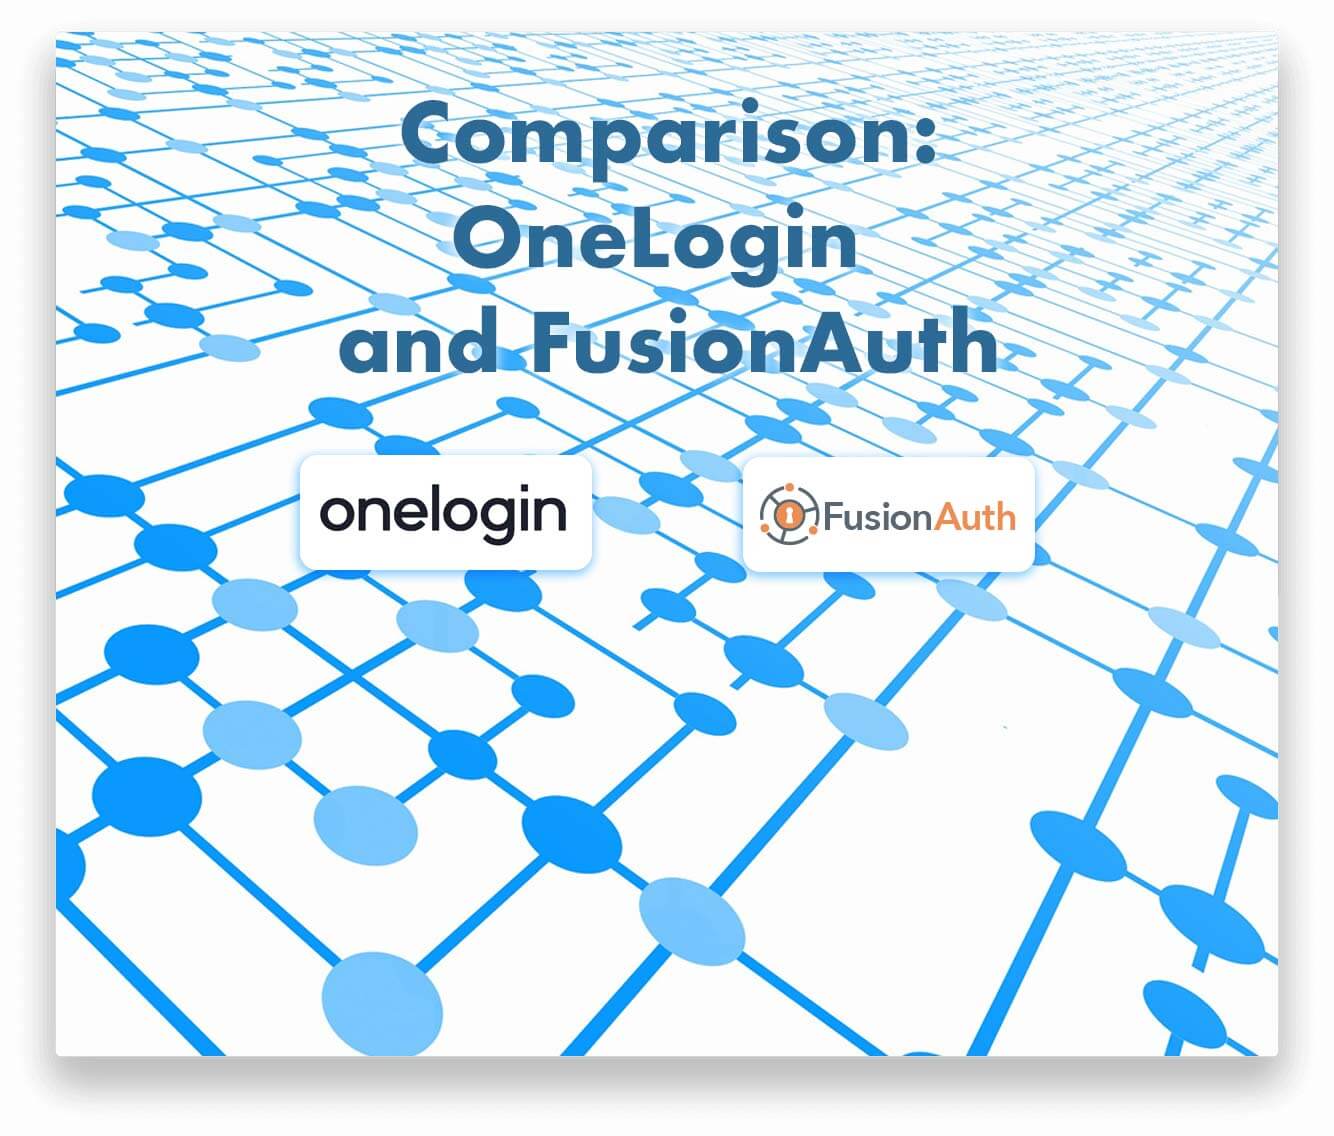 OneLogin and FusionAuth - Different Enough To Make A Difference